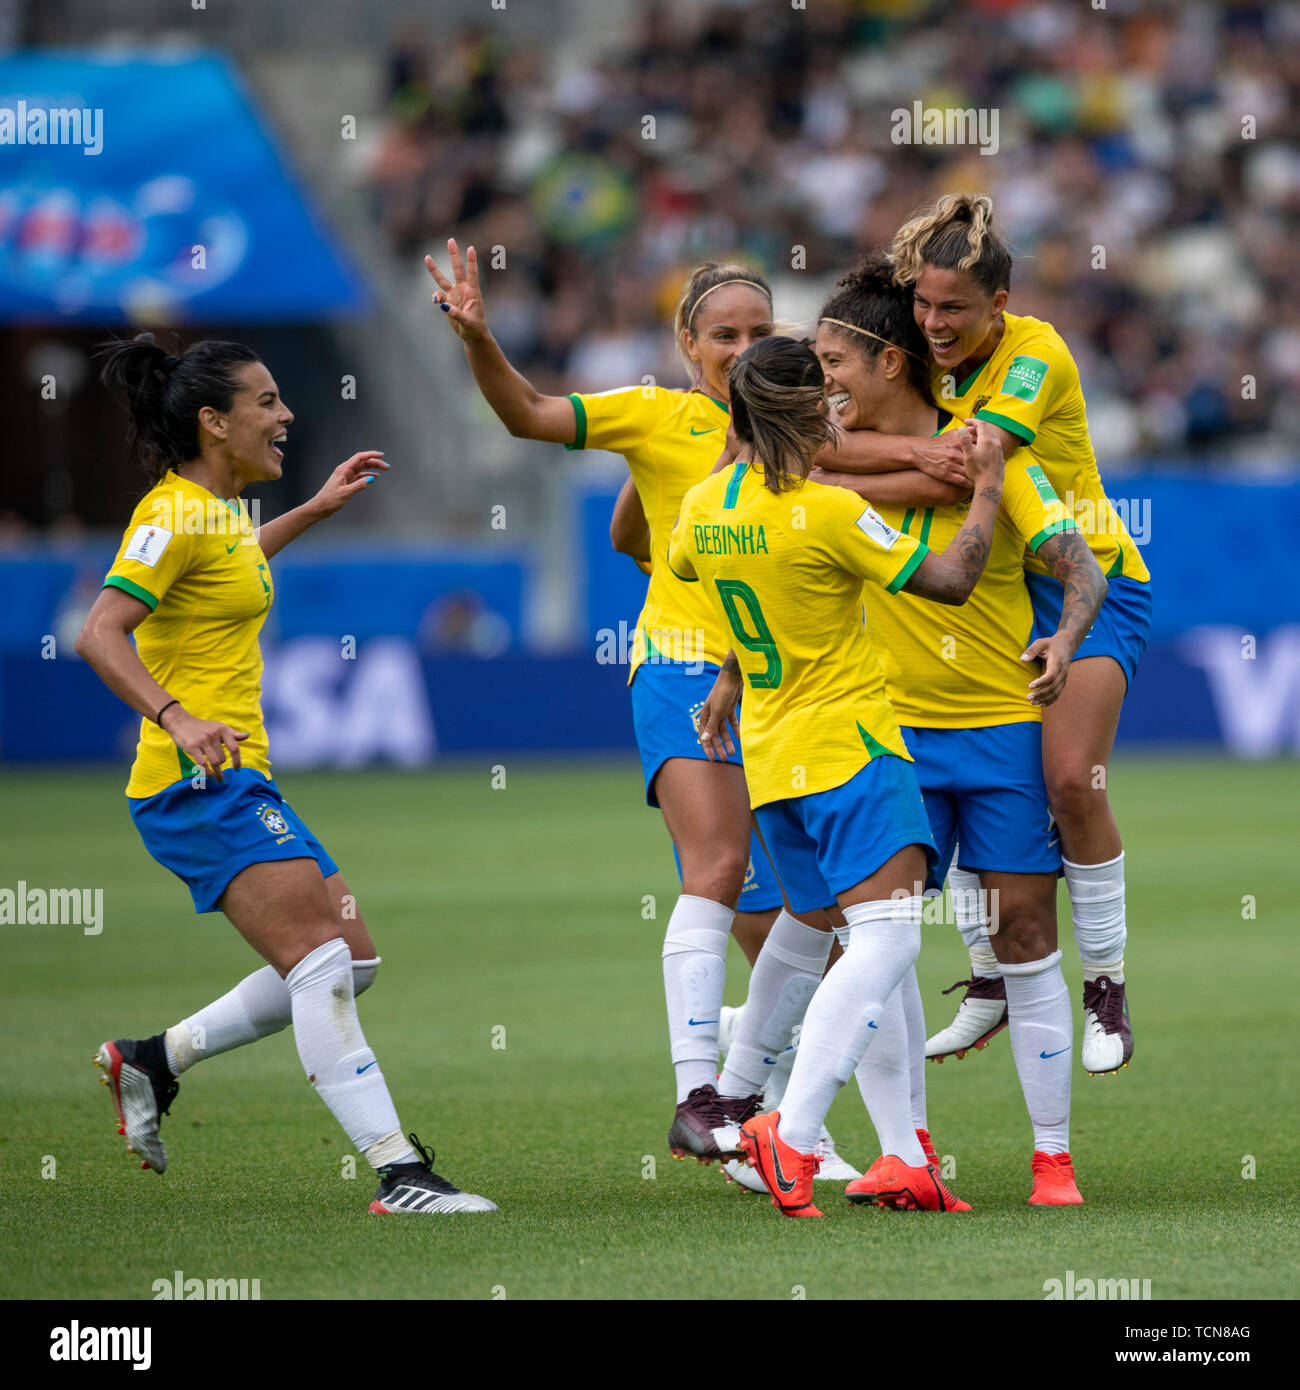 Grenoble, France. 09th June, 2019. BRAZIL VS. JAMAICA - Cristiane do Brasil celebrates after scoring a goal (3-0), her third, during a match between Brazil and Jamaica, valid for the 2019 FIFA Women&#39;s World Cup, held on Sunday, June 9, 2019, at the Stadium Stade des Alpes in Grenoble, France. Credit: Foto Arena LTDA/Alamy Live News Stock Photo